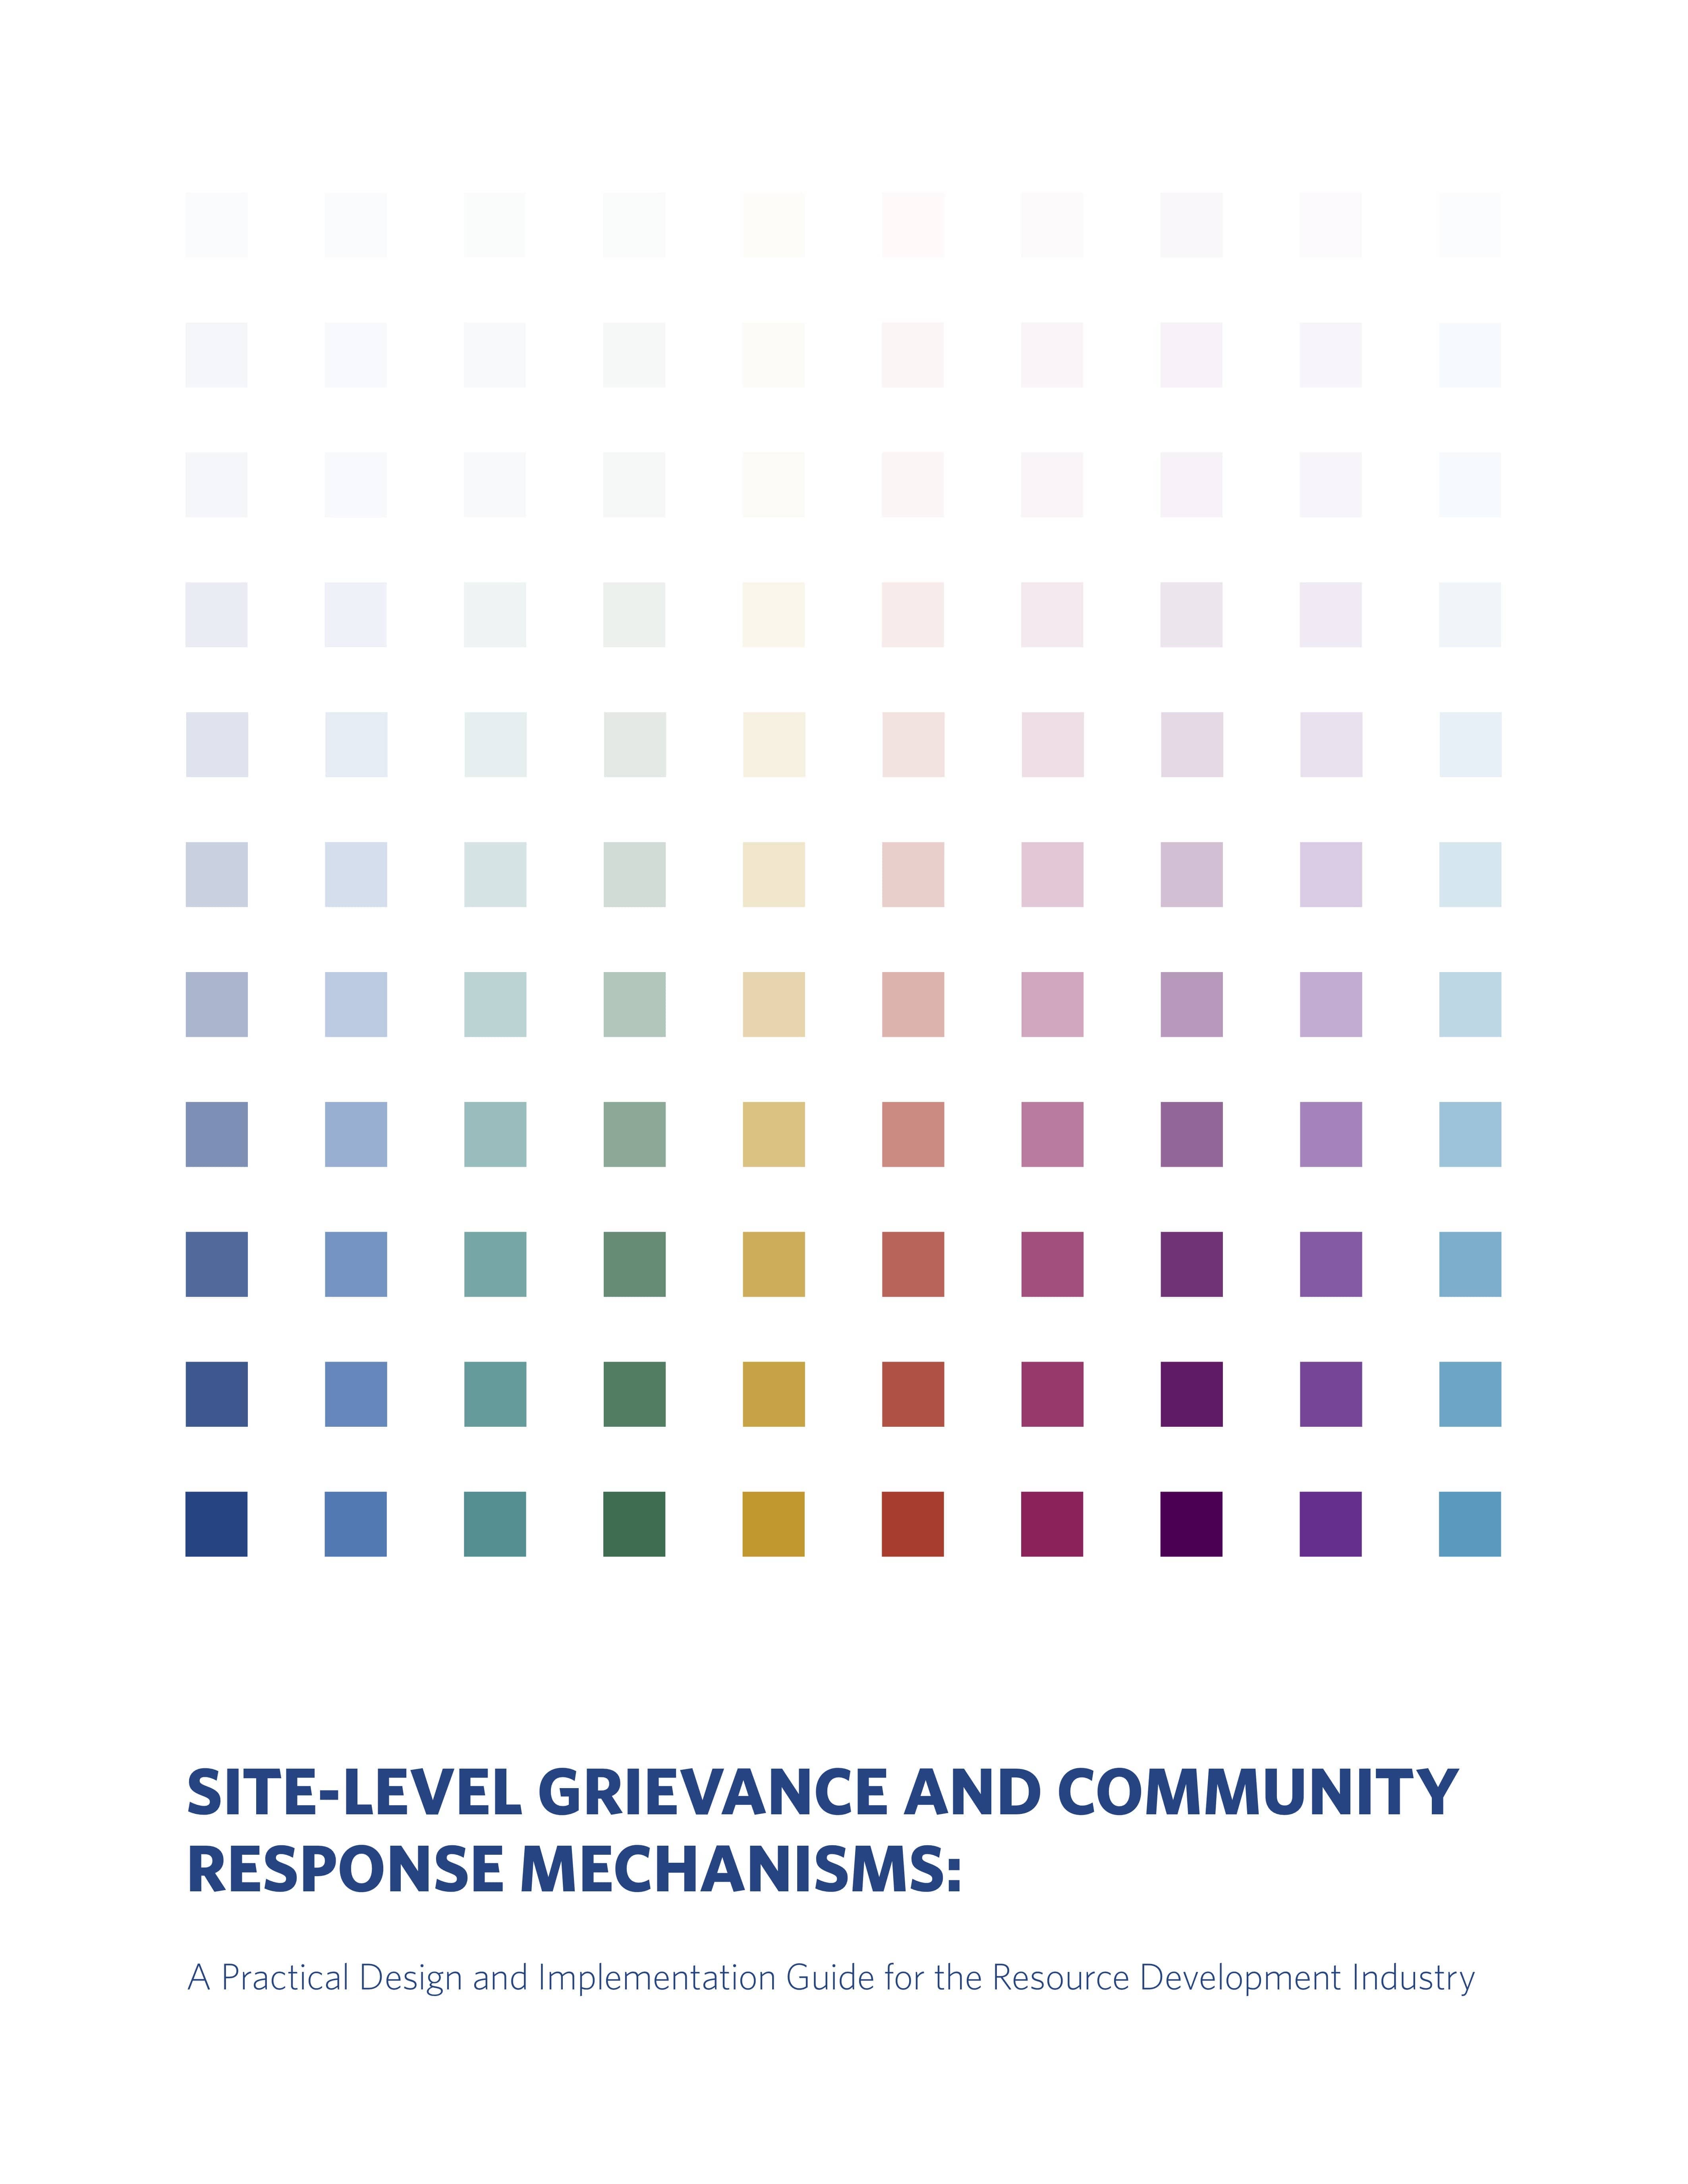 Site-level Grievance and Community Response Mechanisms: A Practical Design and Implementation Guide for the Resource Development Industry (MAC, 2015)